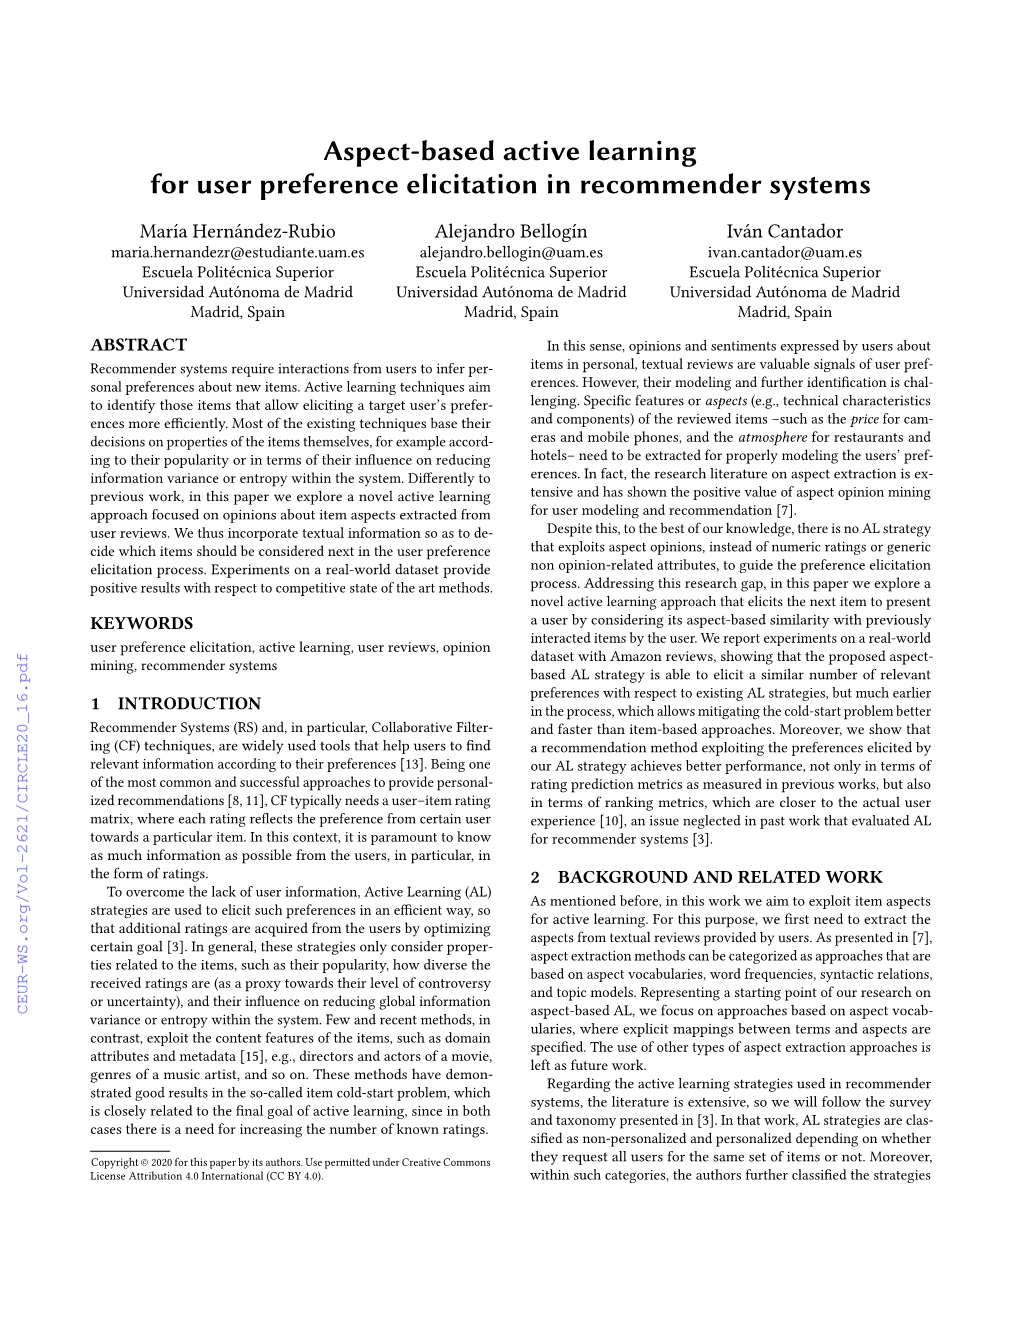 Aspect-Based Active Learning for User Preference Elicitation in Recommender Systems